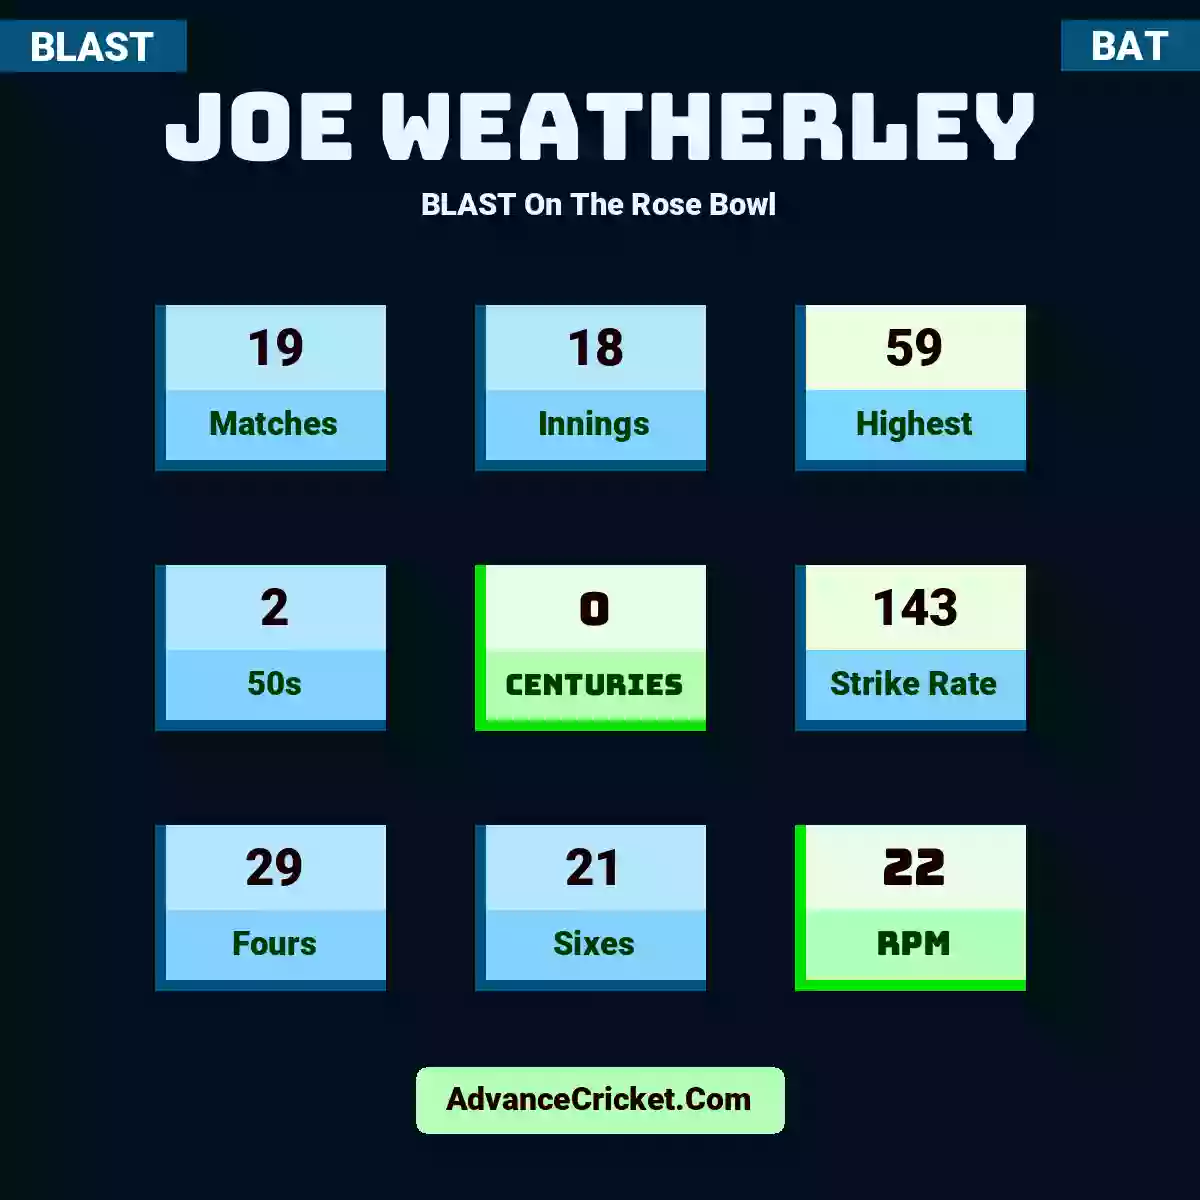 Joe Weatherley BLAST  On The Rose Bowl, Joe Weatherley played 19 matches, scored 59 runs as highest, 2 half-centuries, and 0 centuries, with a strike rate of 143. J.Weatherley hit 29 fours and 21 sixes, with an RPM of 22.